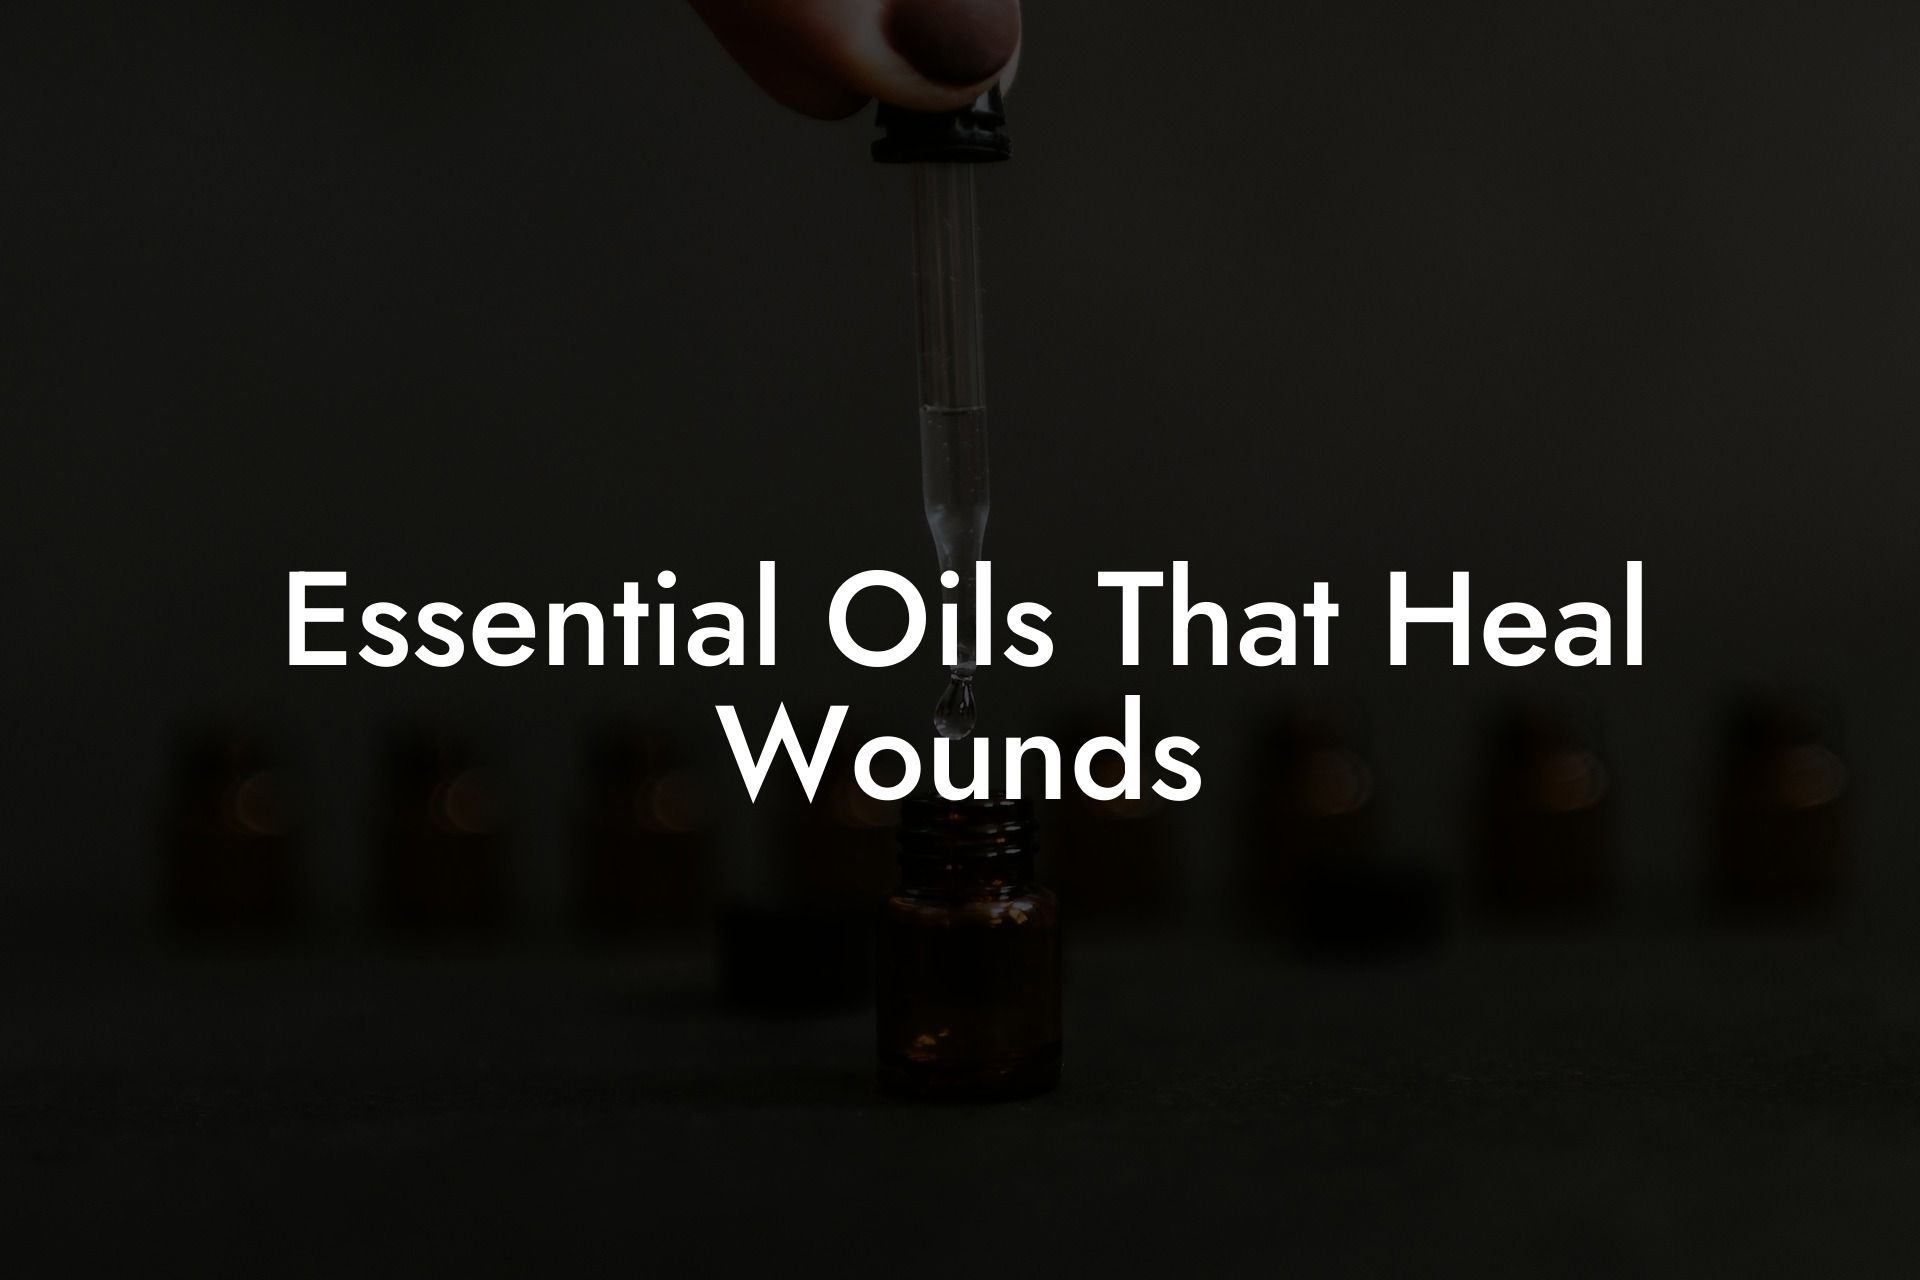 Essential Oils That Heal Wounds